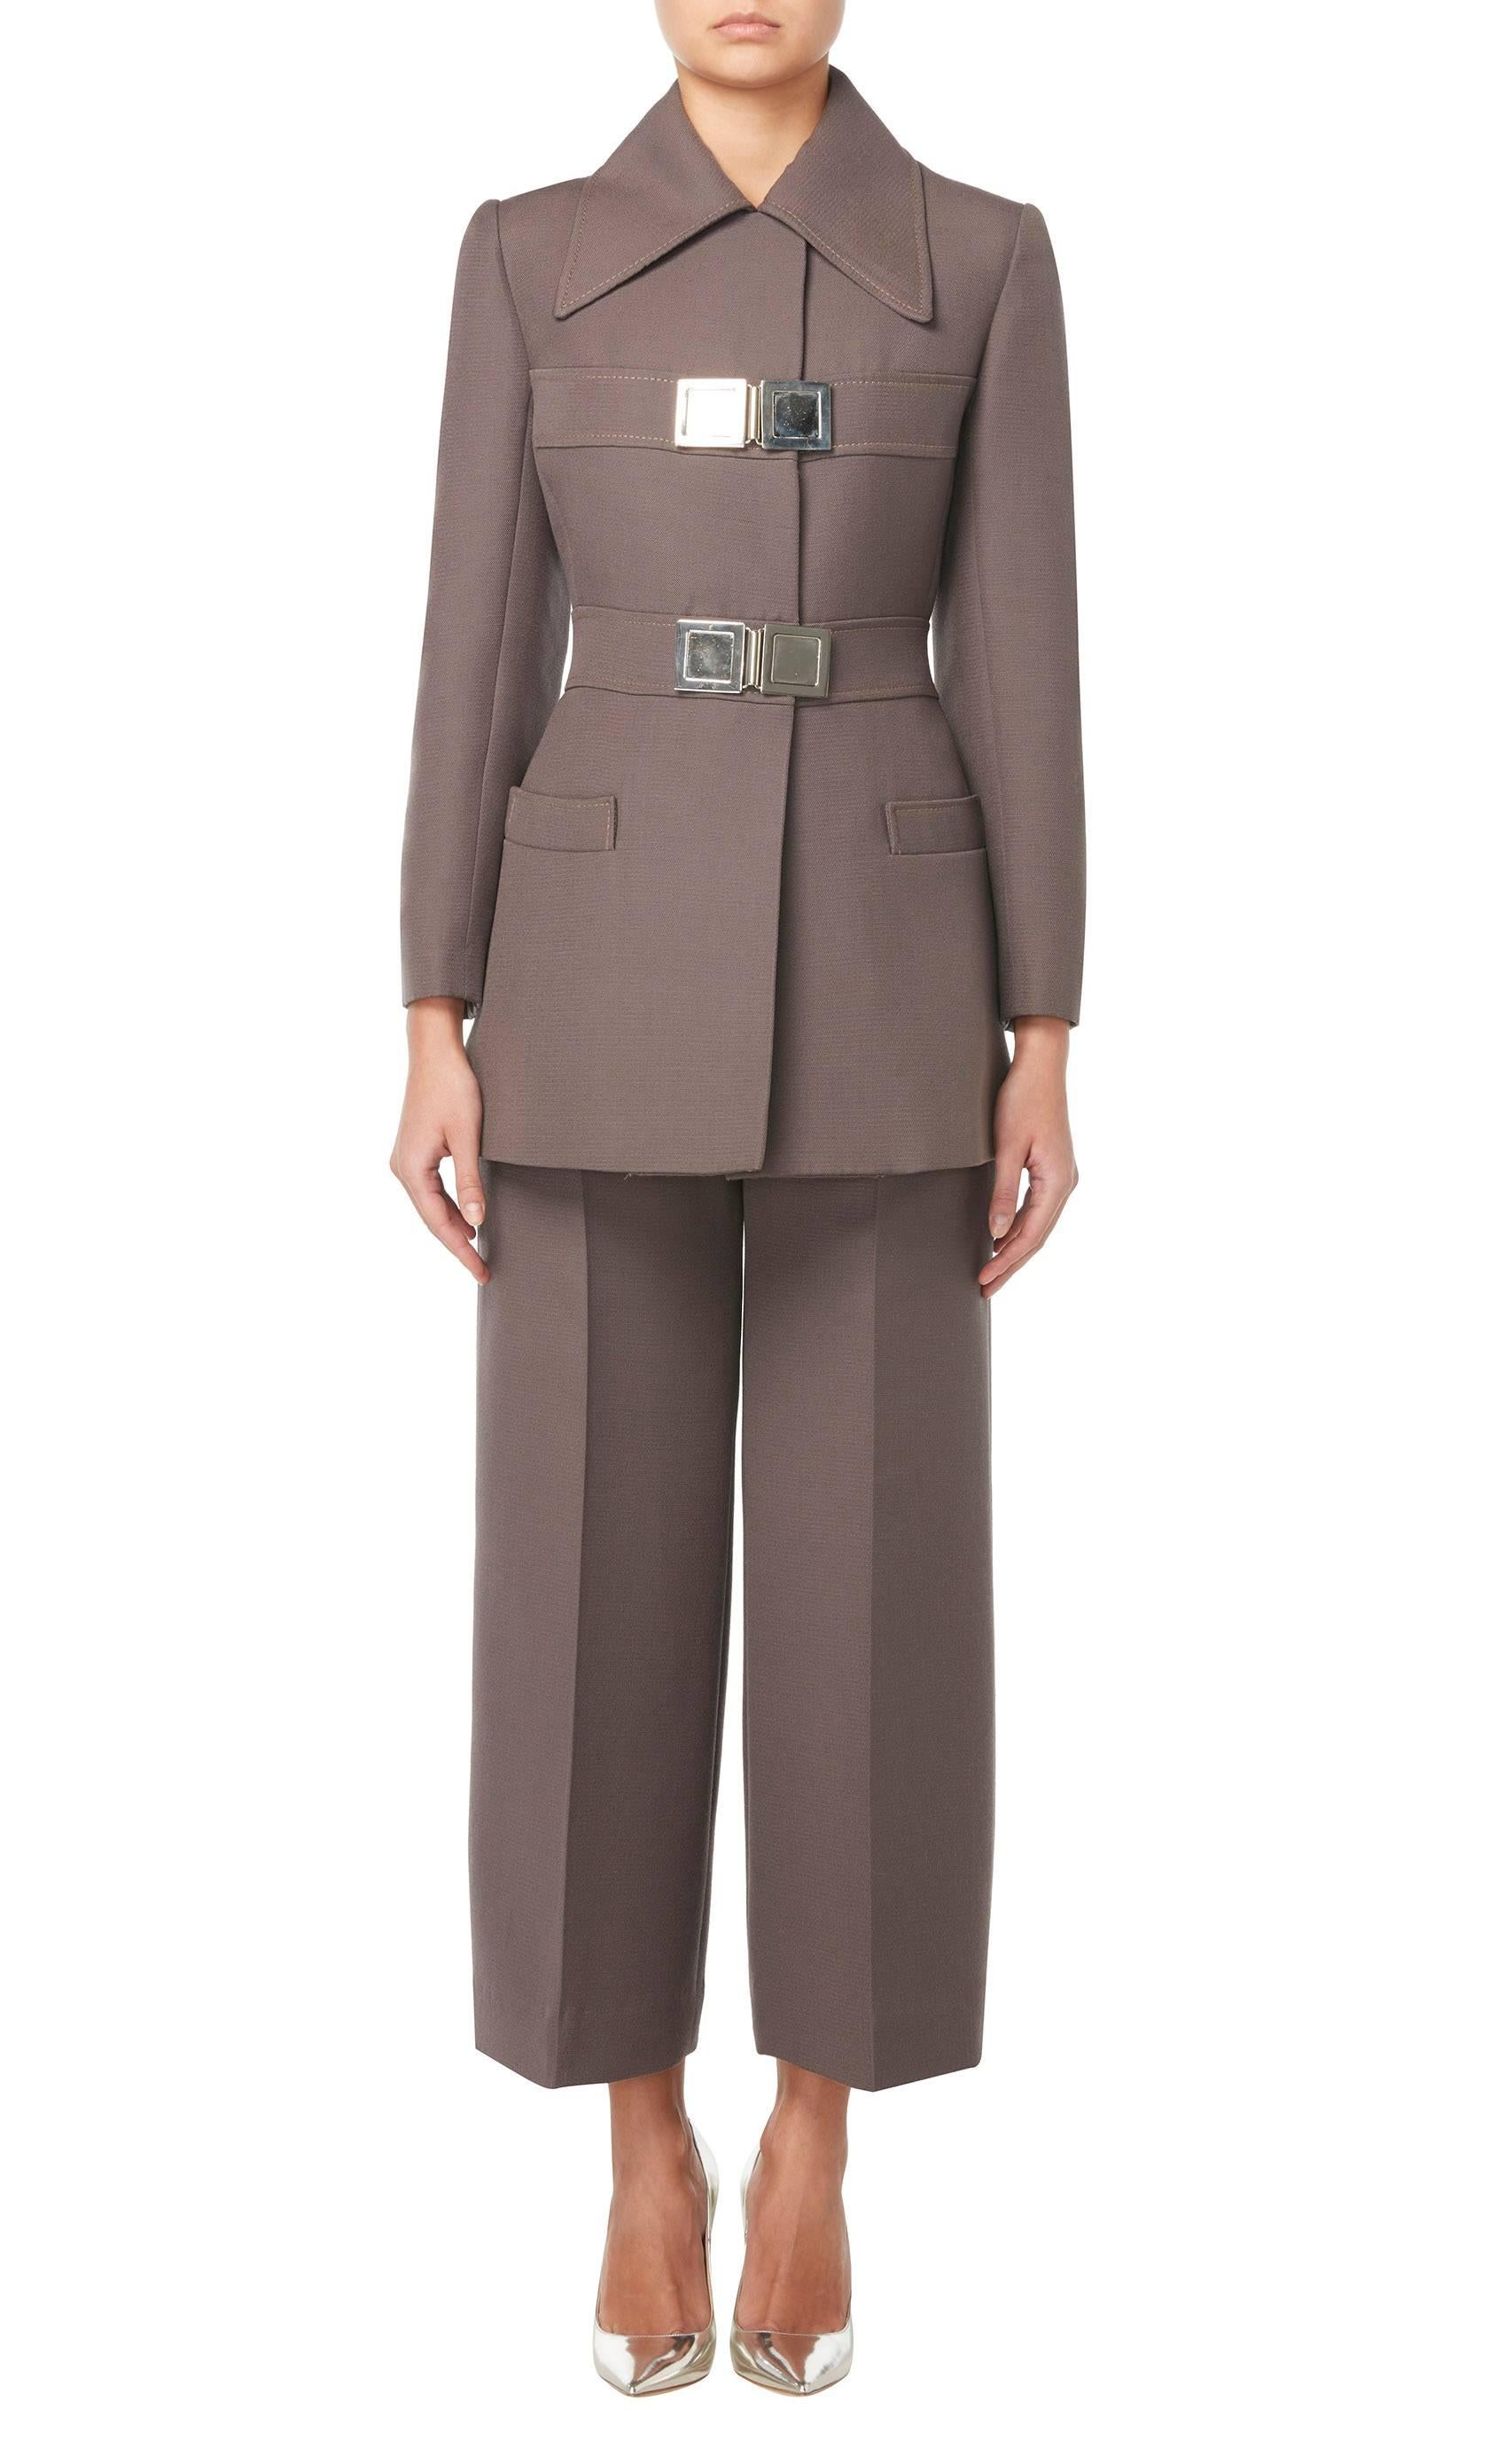 This sharply tailored, military-inspired trouser suit by Jean Patou will make a great alternative to traditional office wear. Constructed in brown wool, the suit is comprised of a jacket and straight cut trousers. With an exaggerated collar, the